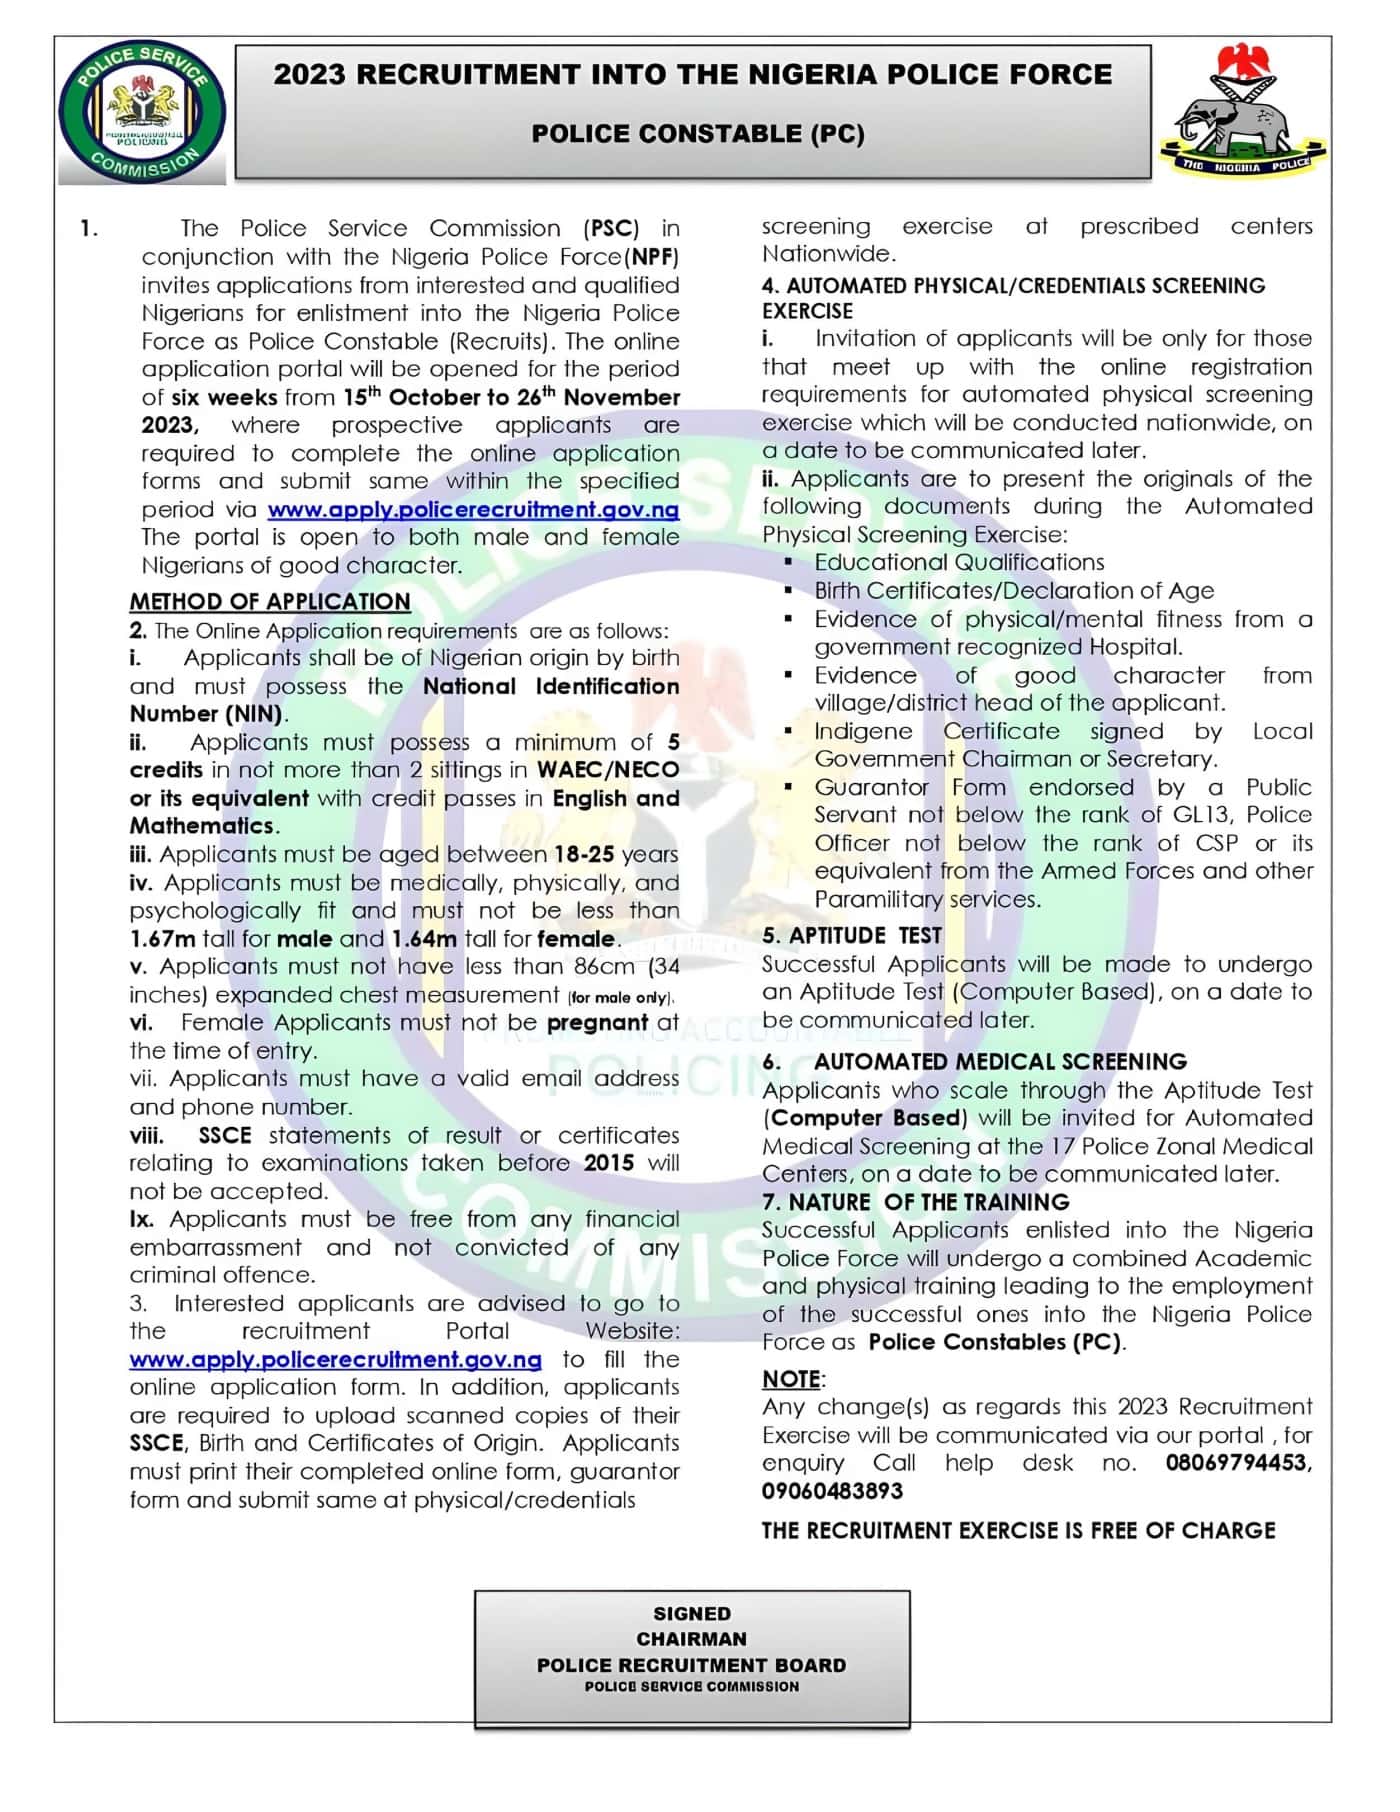 Nigeria Police Force (NPF) Nationwide Police Constable Recruitment 2023